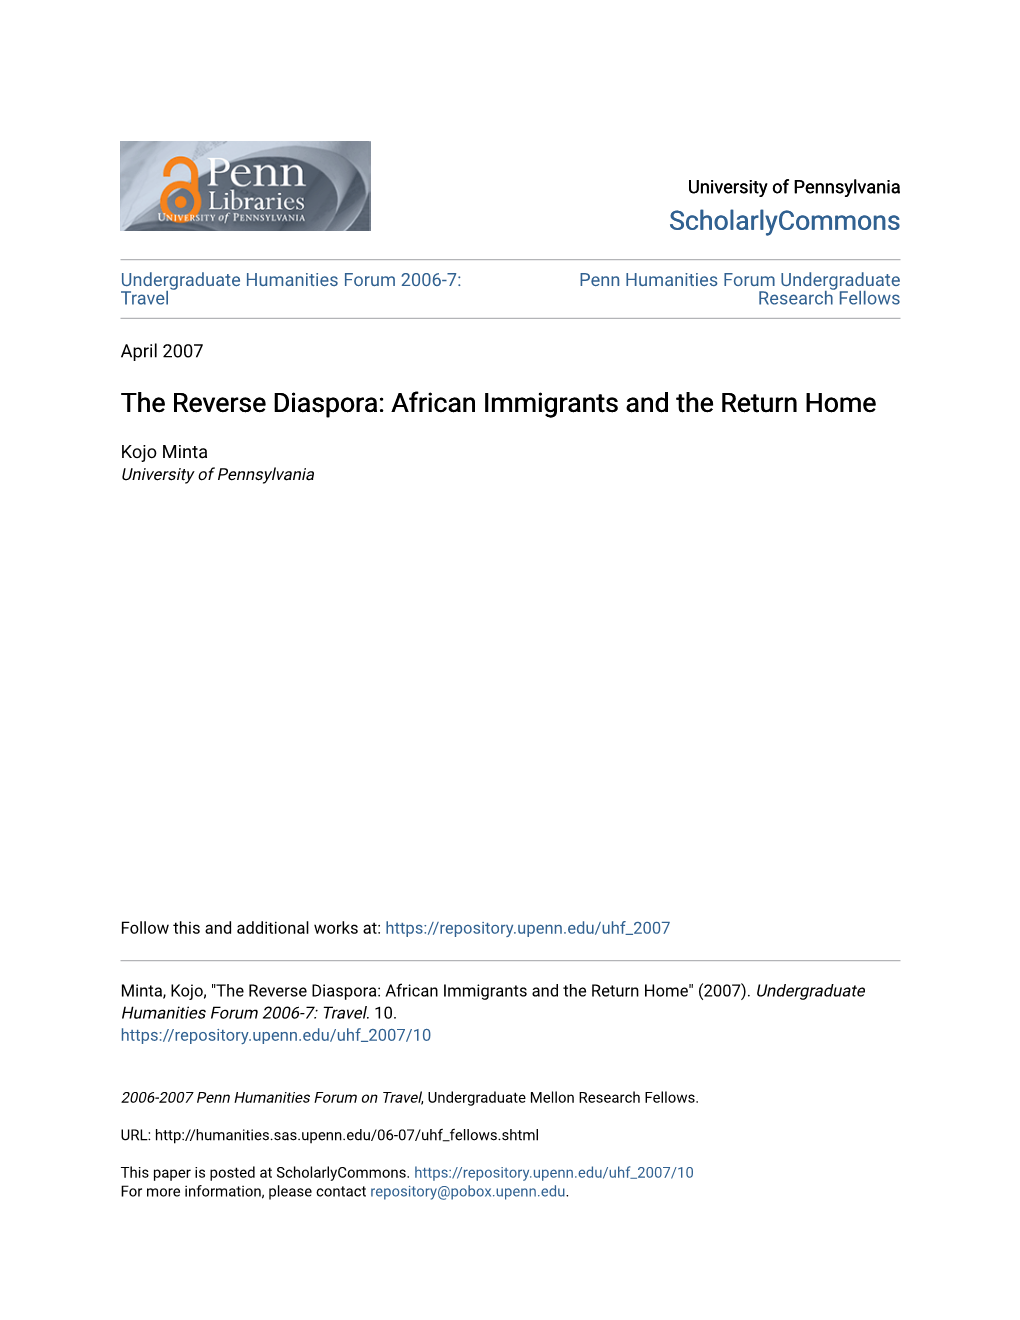 The Reverse Diaspora: African Immigrants and the Return Home